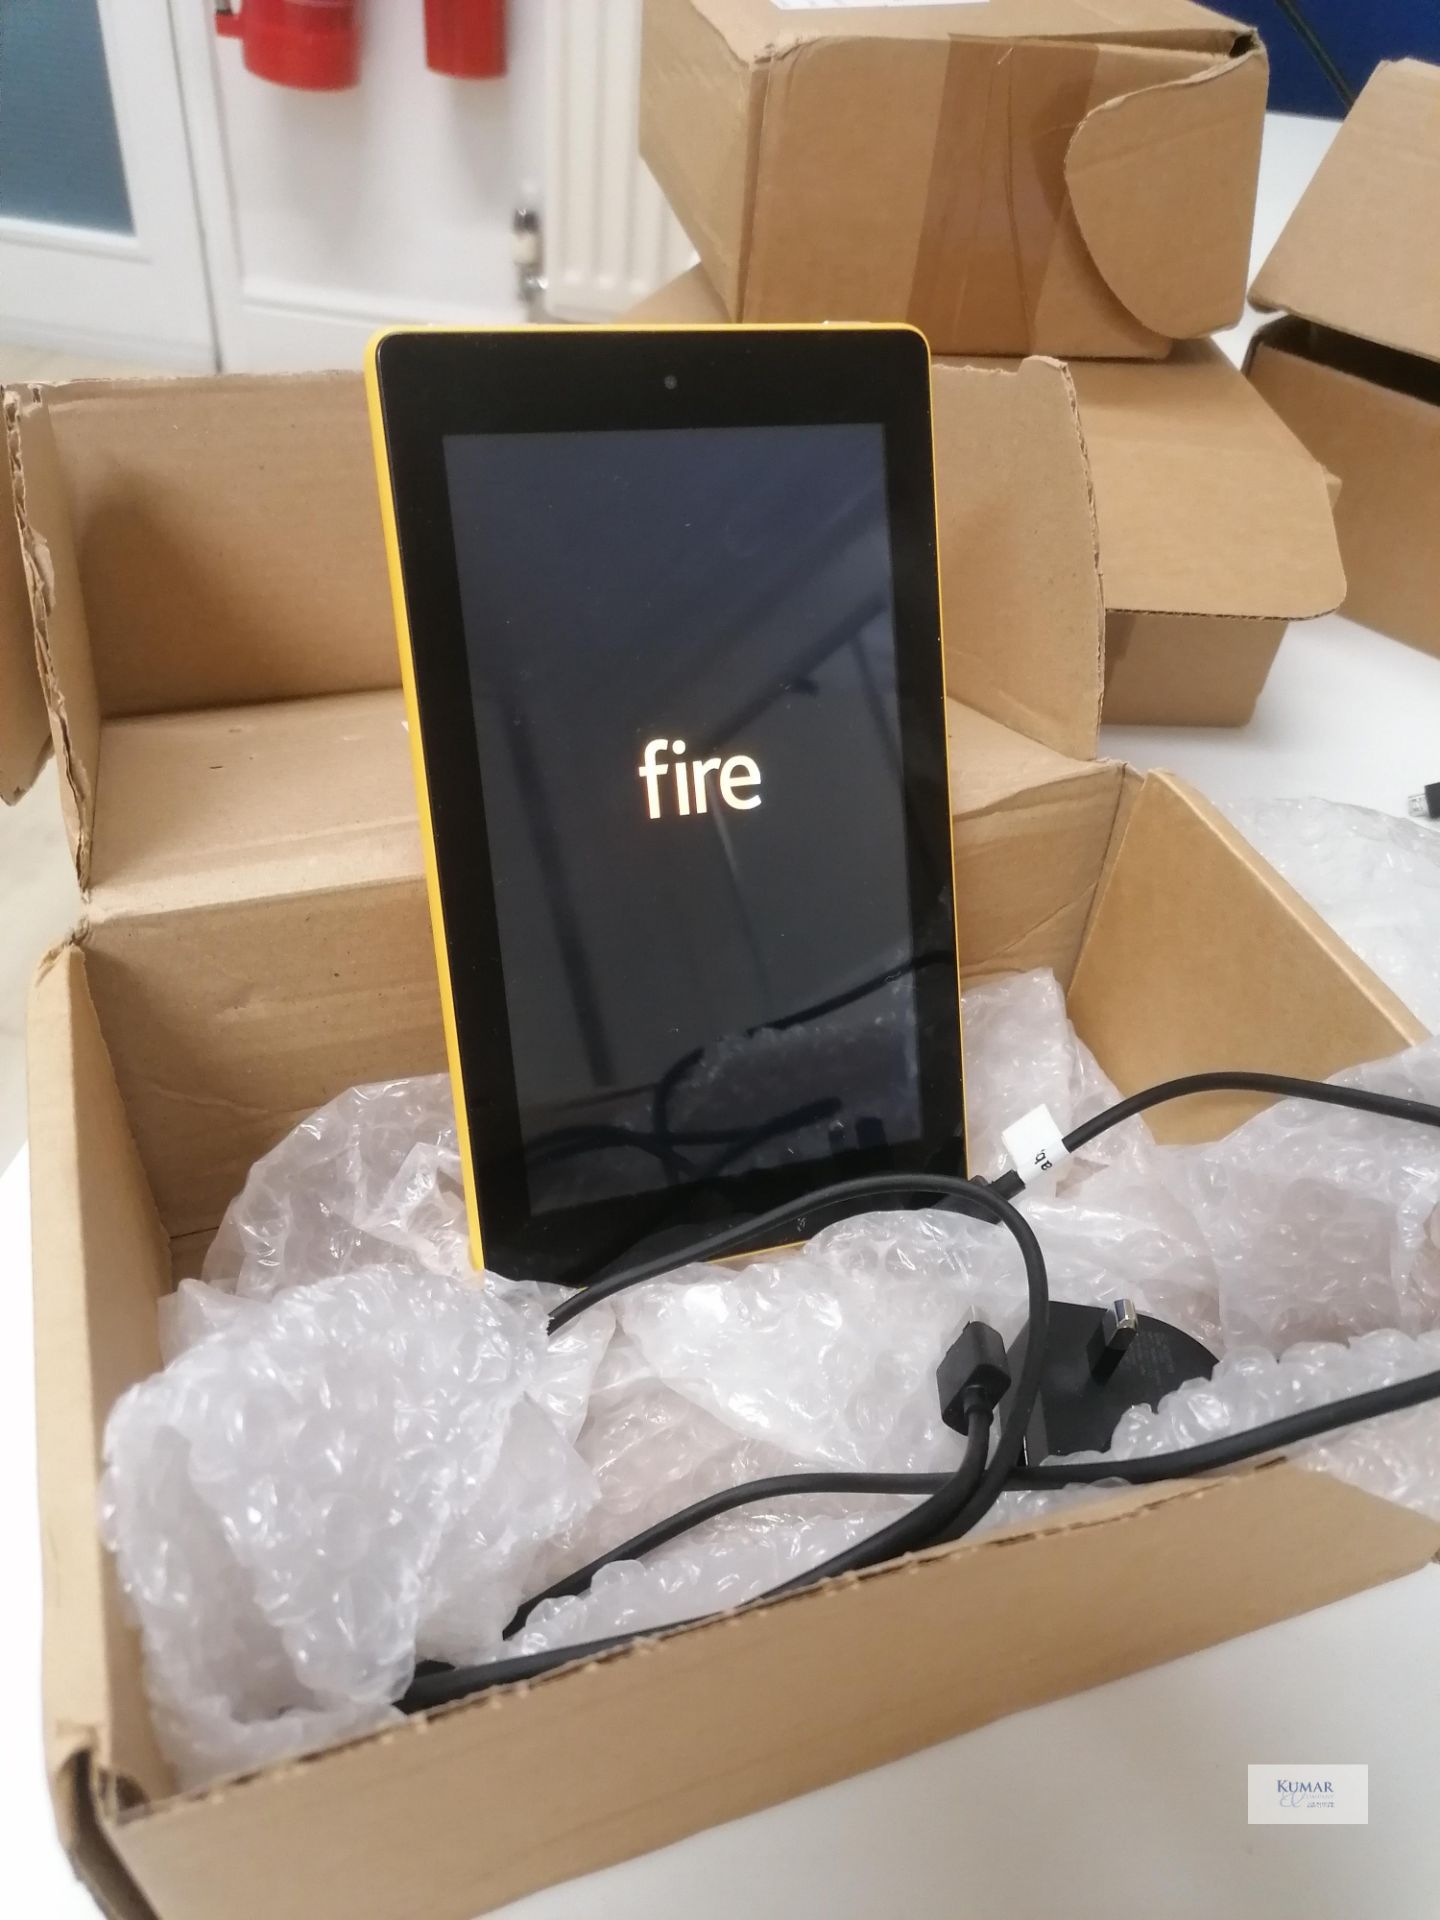 Amazon Fire 7.7" Touch screen Model No SRO43KL Updated 06 09 2019 Cable and charger